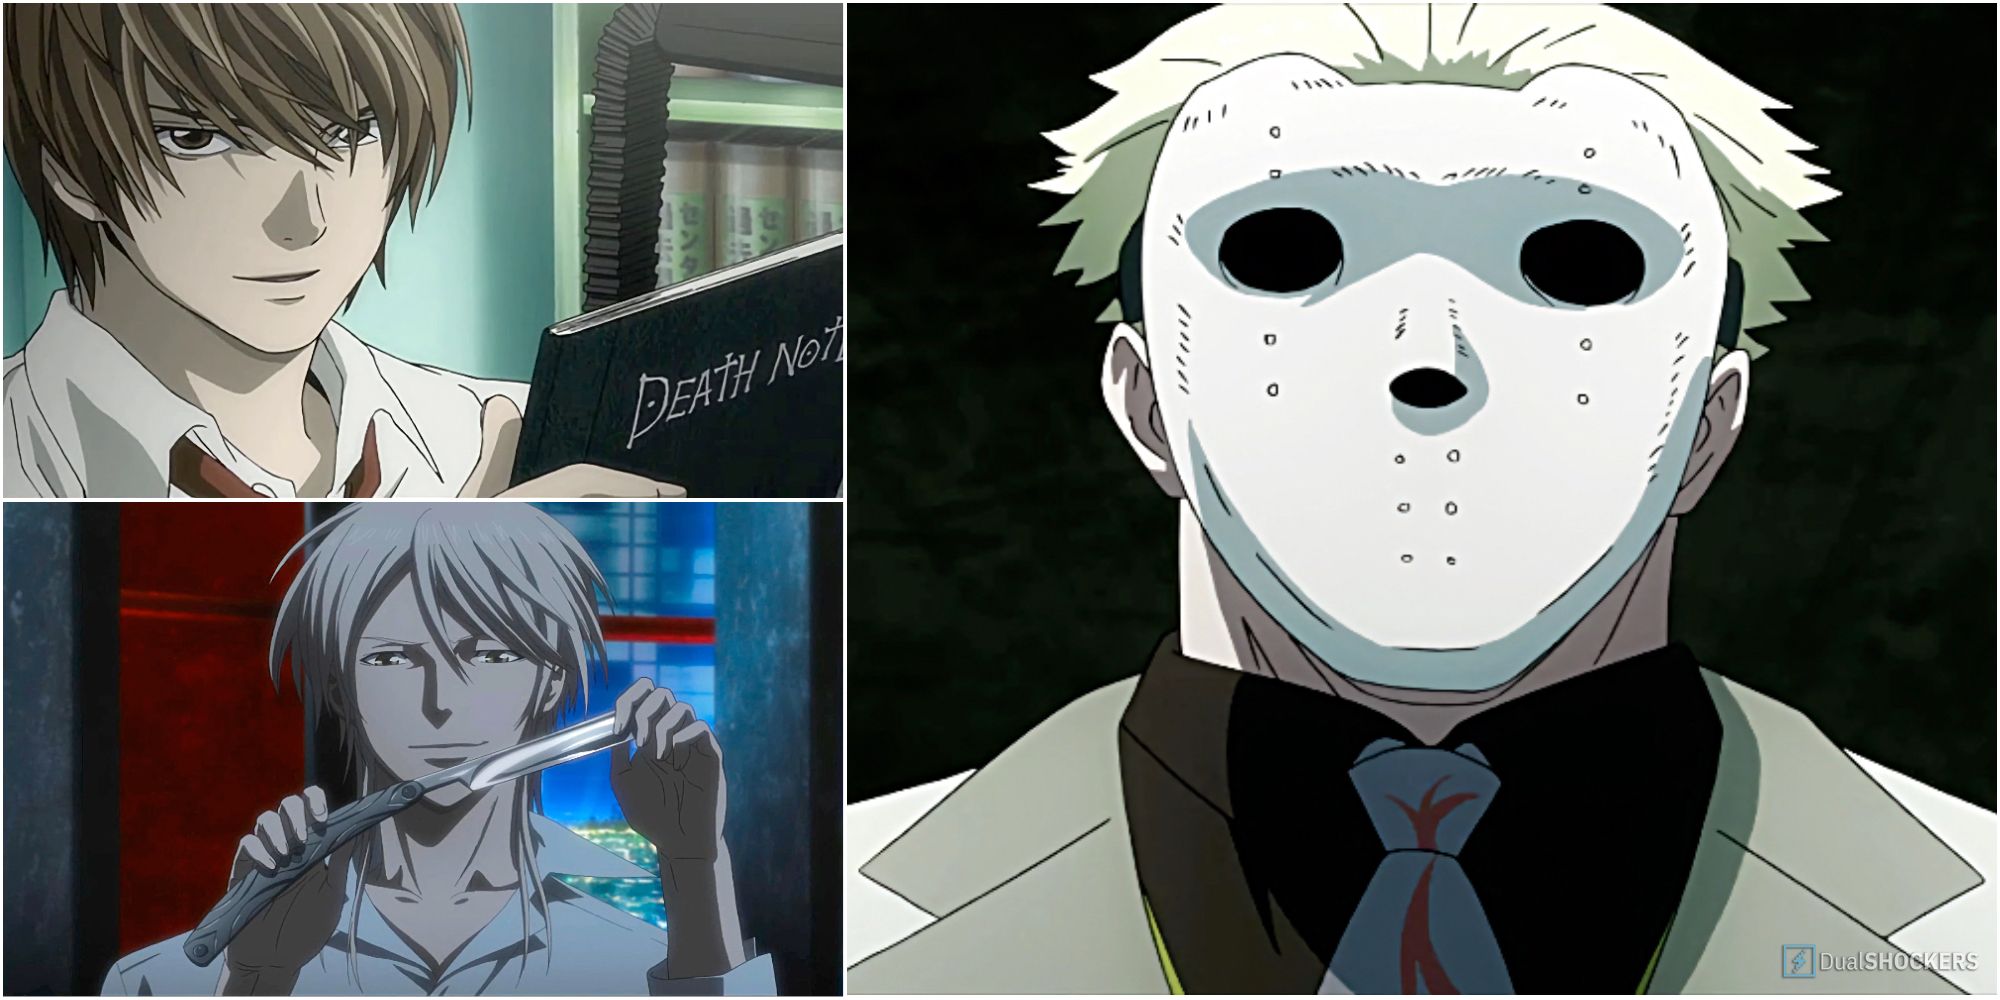 The 15 Most Dangerous Anime Serial Killers Of All Time